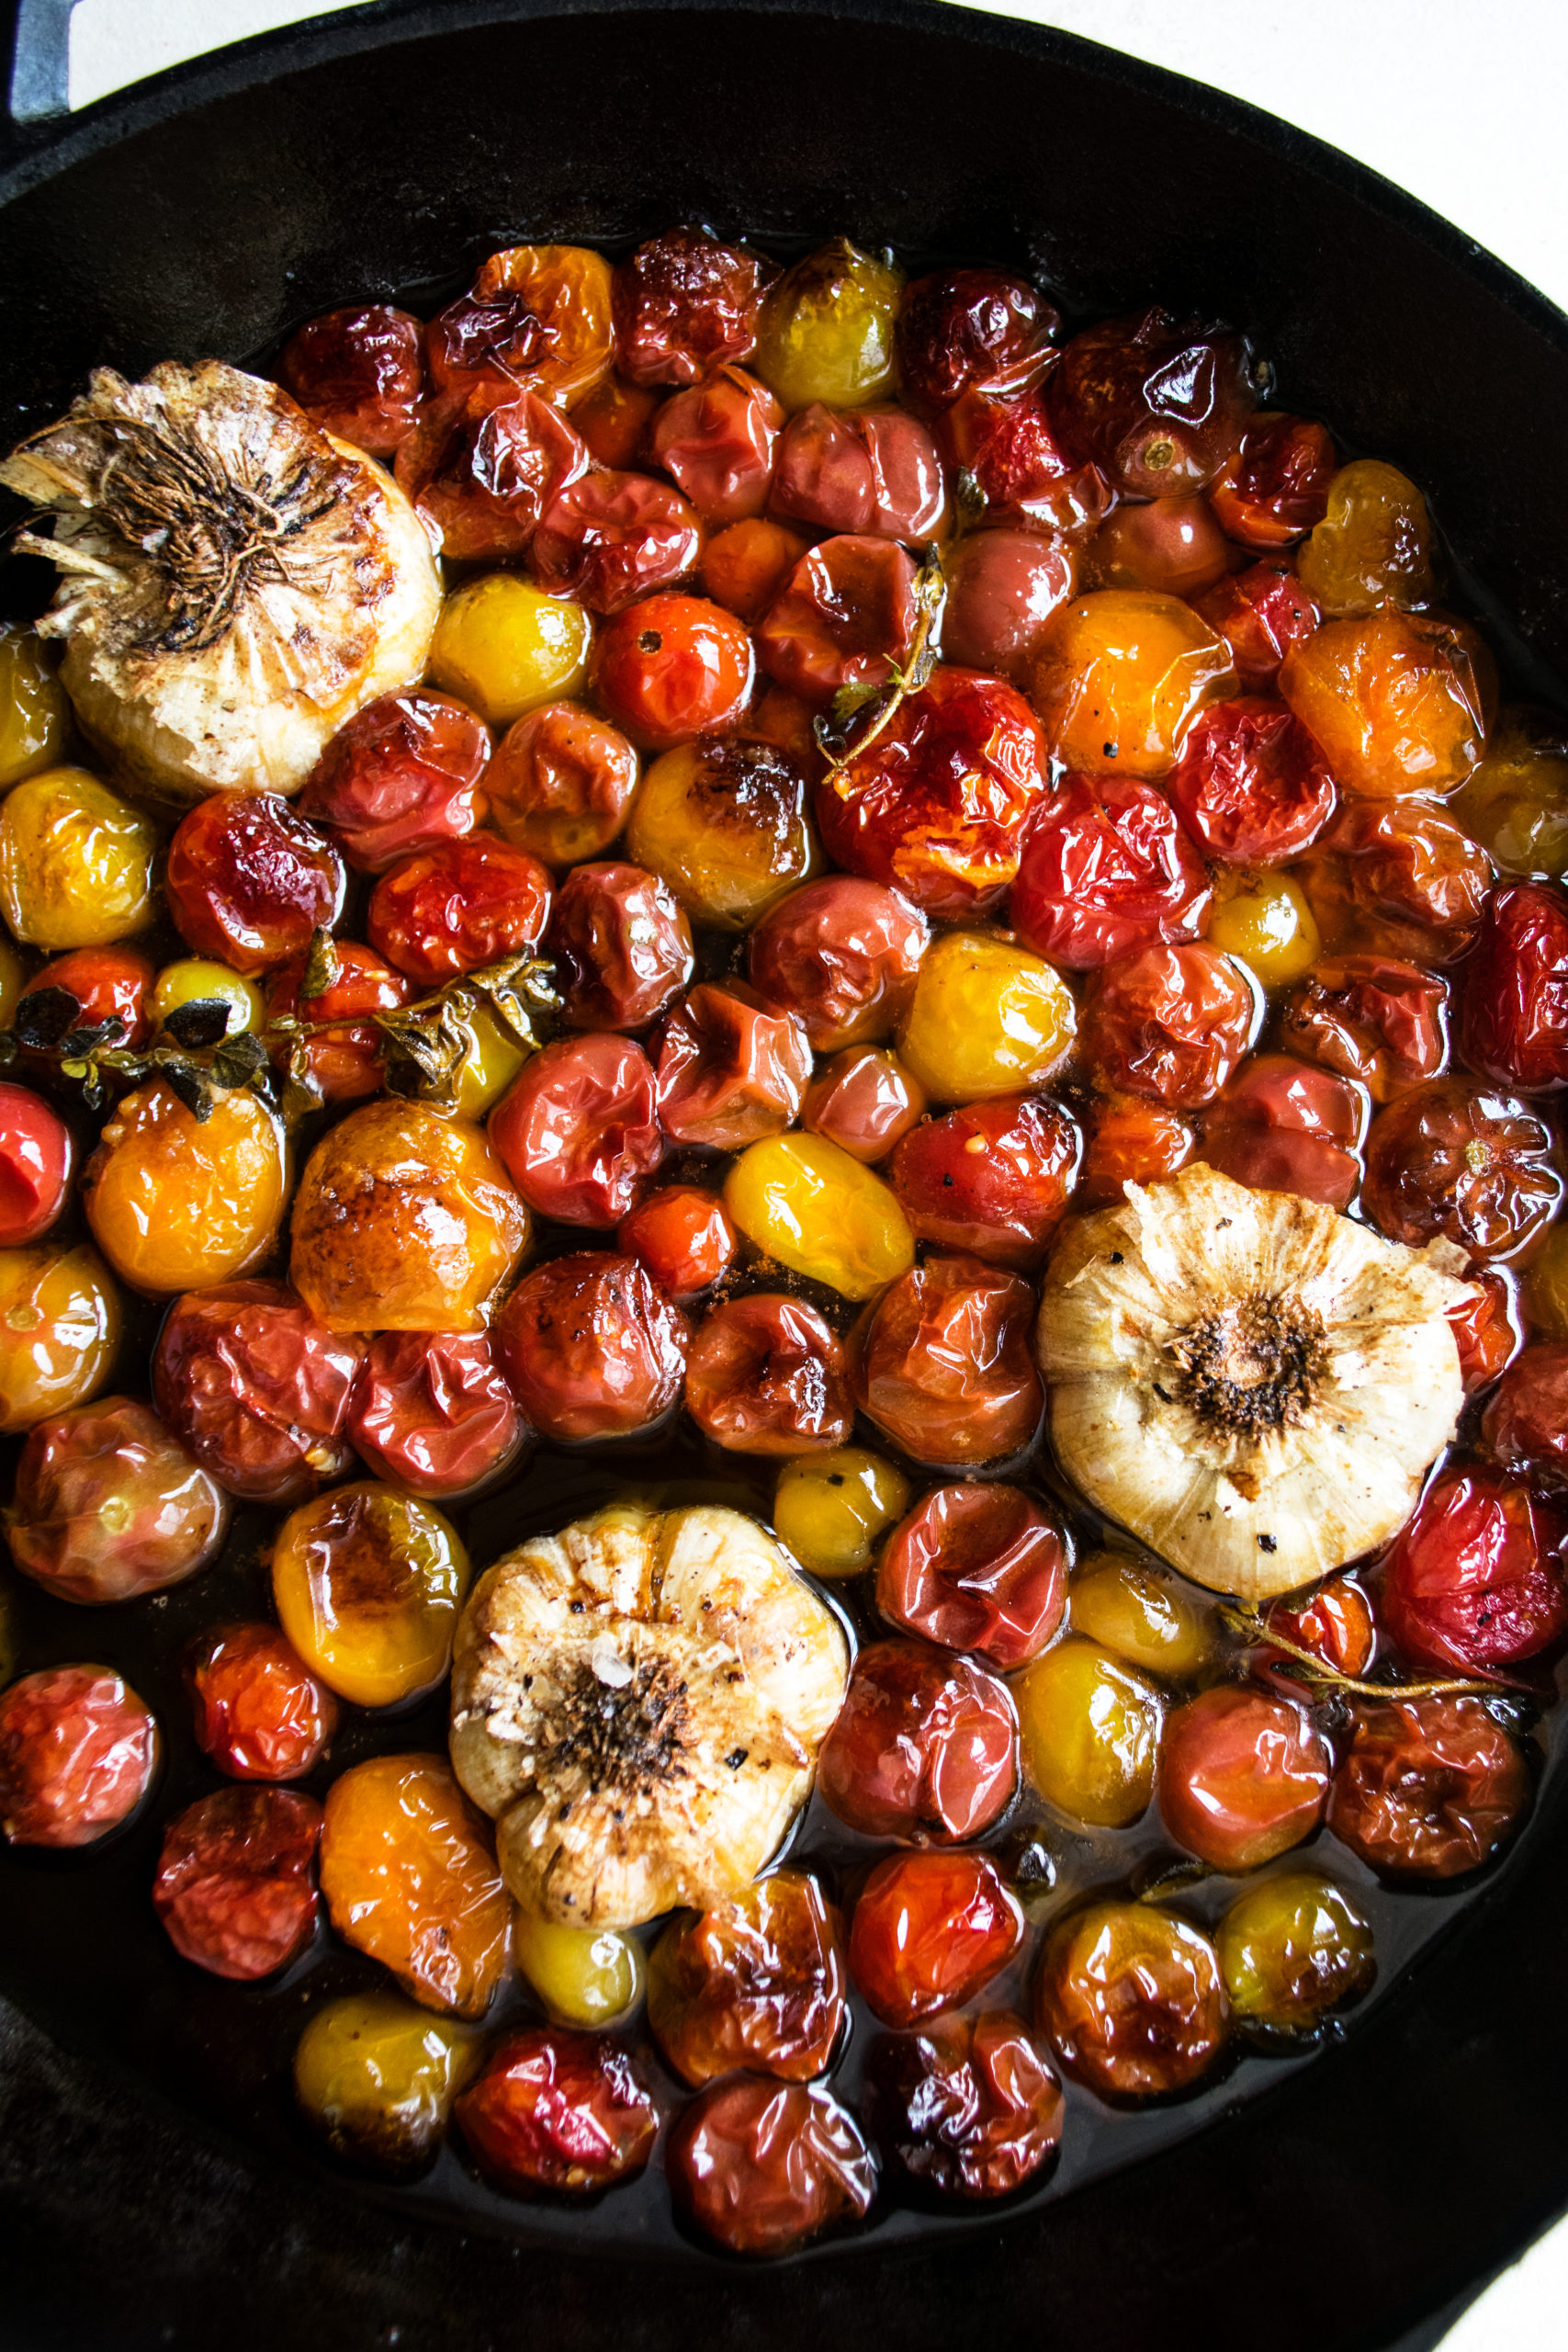 Burrata Cheese with Roasted Cherry Tomatoes